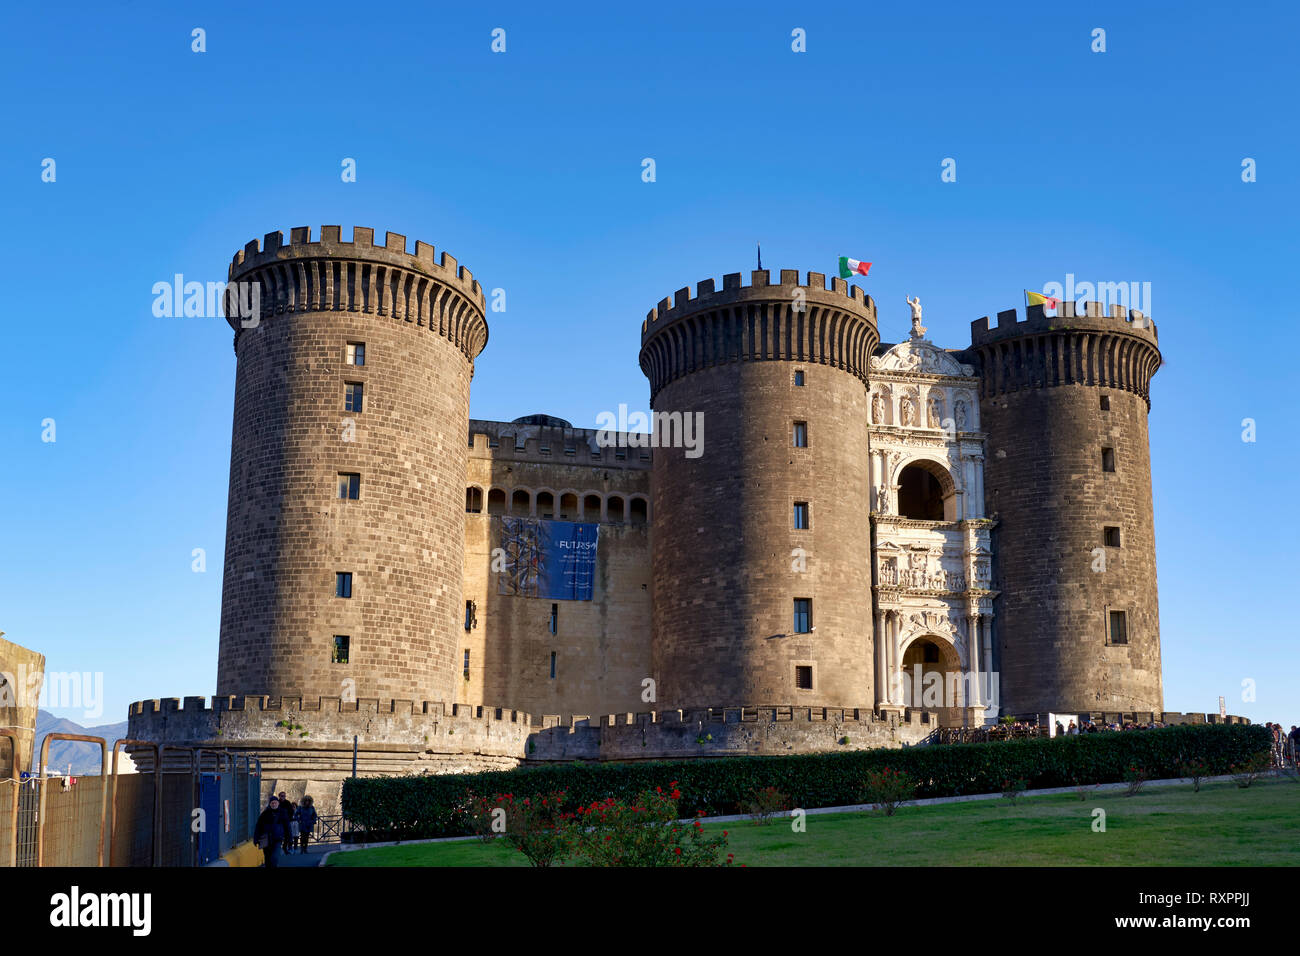 Naples, Campania, Italy. Castel Nuovo (New Castle), often called Maschio Angioino, is a medieval castle located in front of Piazza Municipio and the c Stock Photo